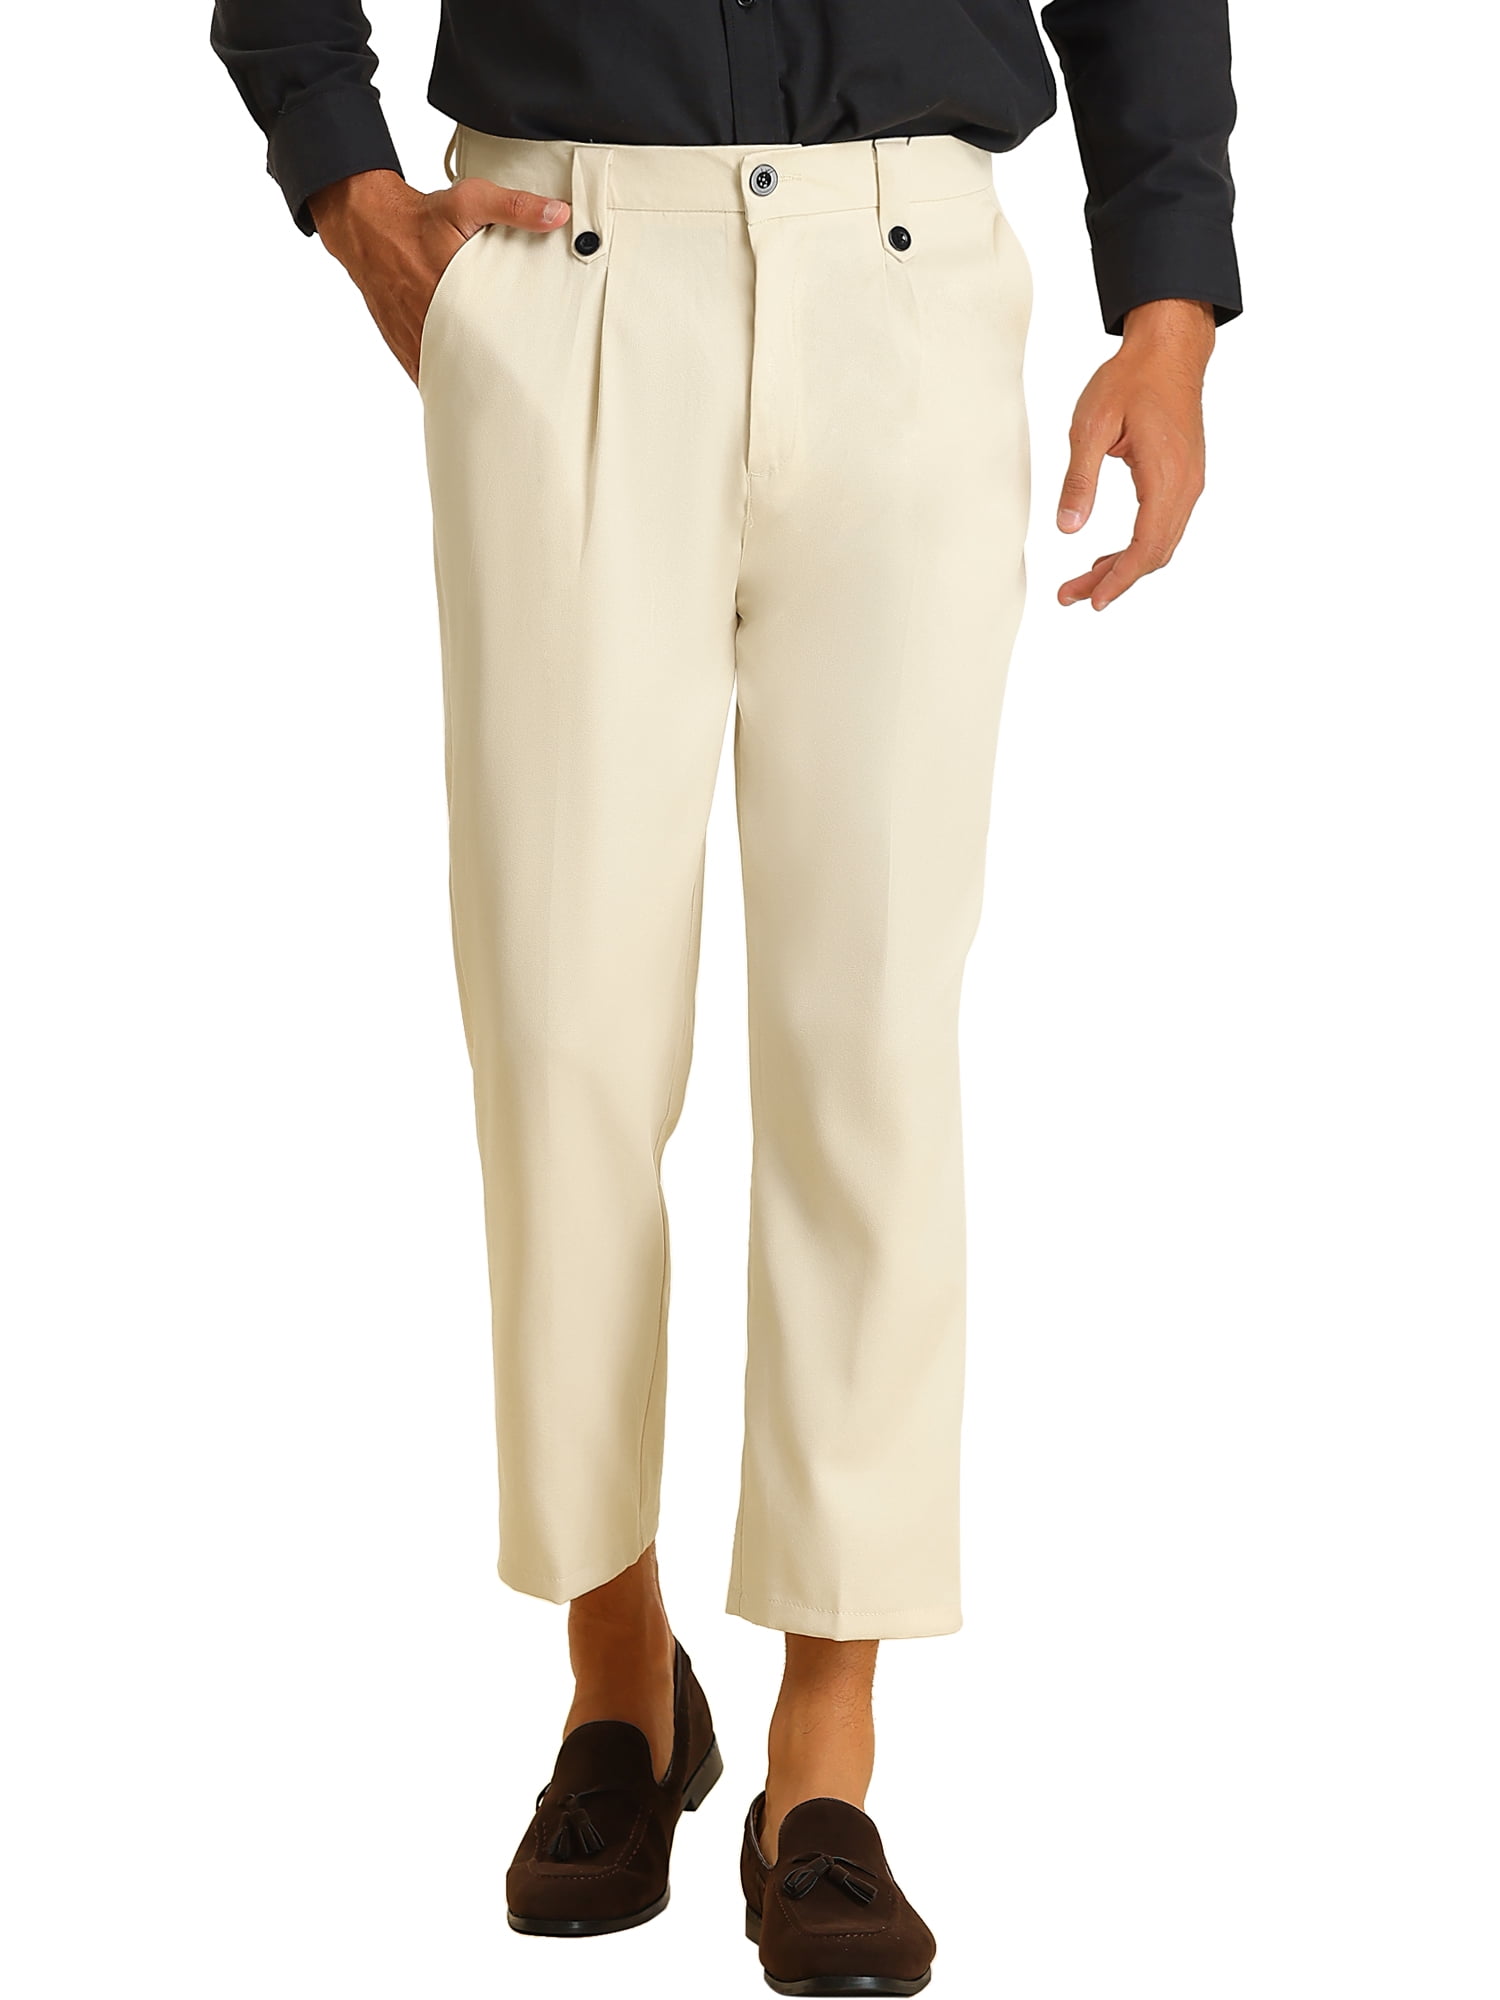 Menswear Essentials Cropped Trouser Best Mens Cropped Trousers